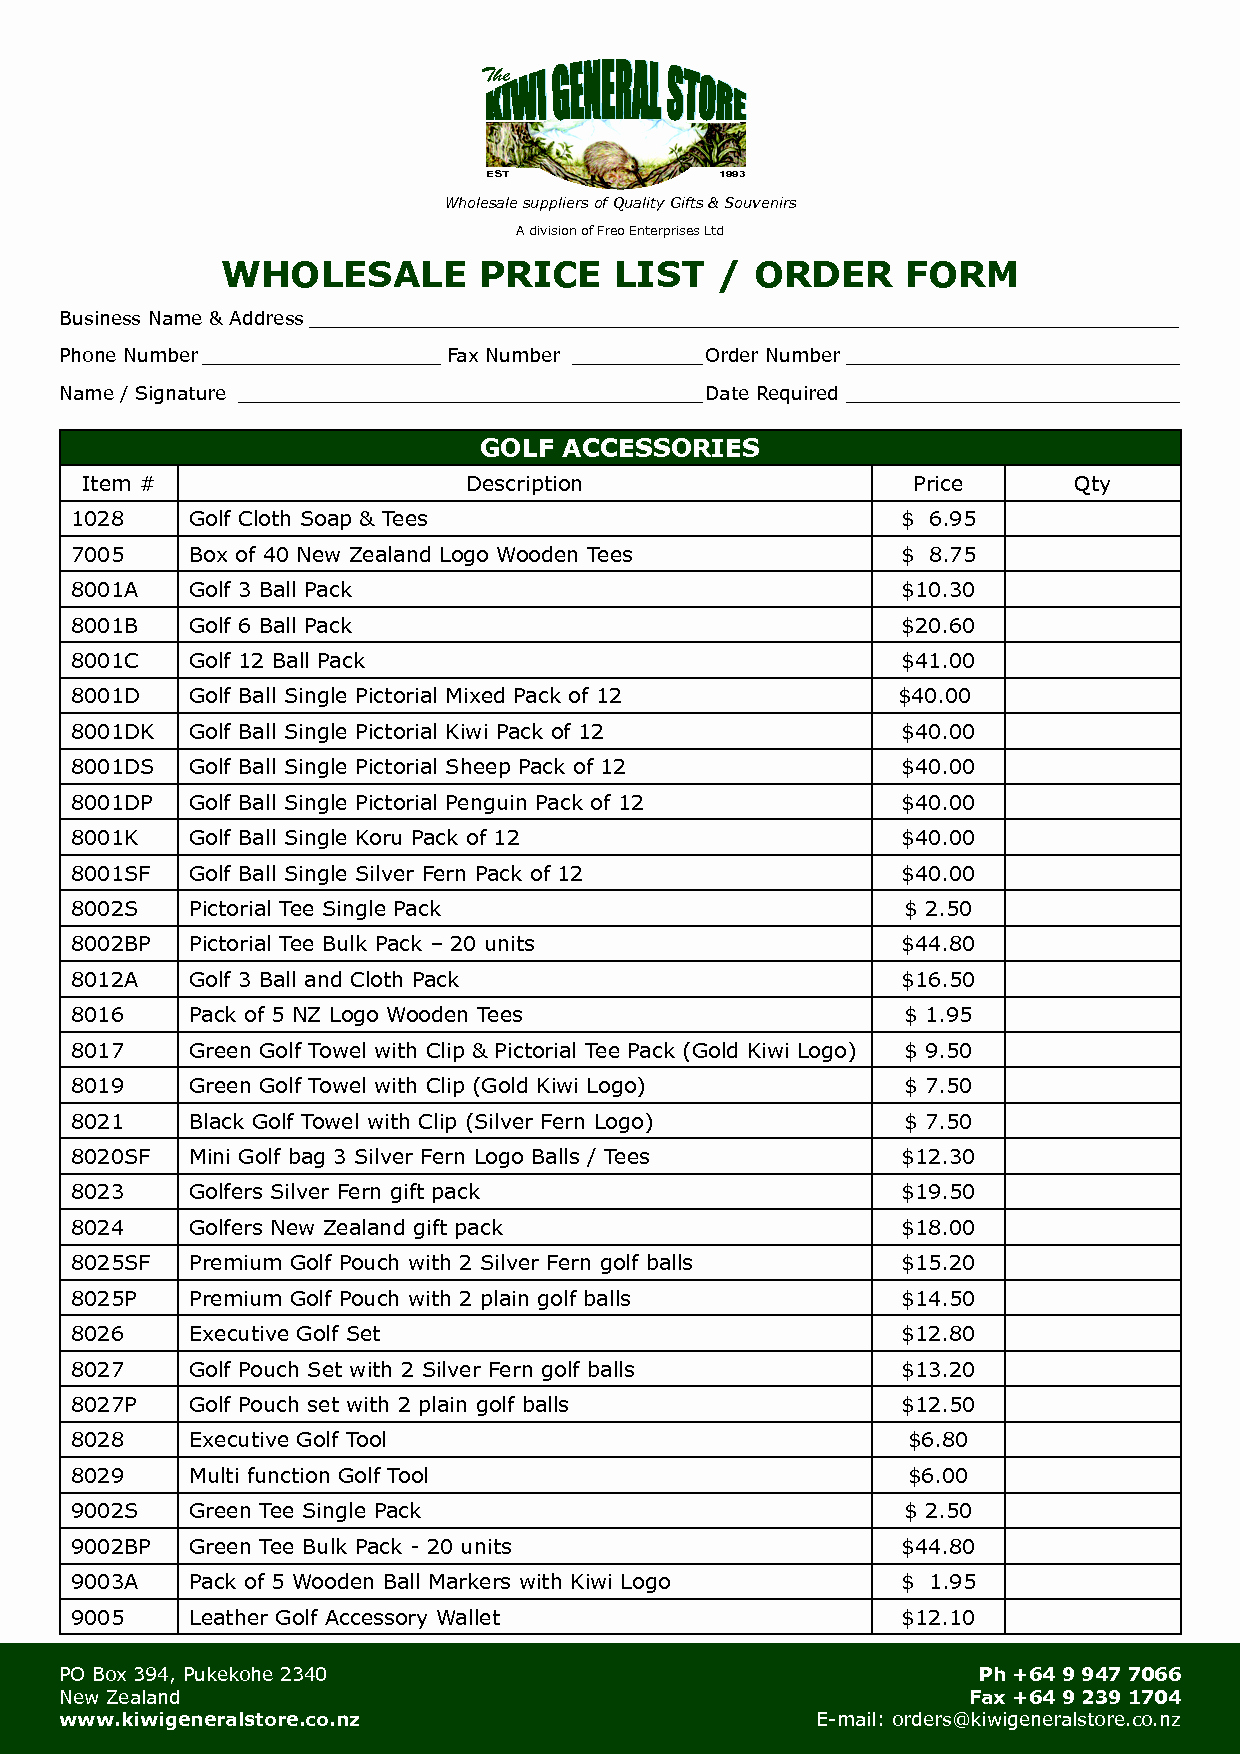 Wholesale Price List Template Awesome Best S Of Product order form Template wholesale